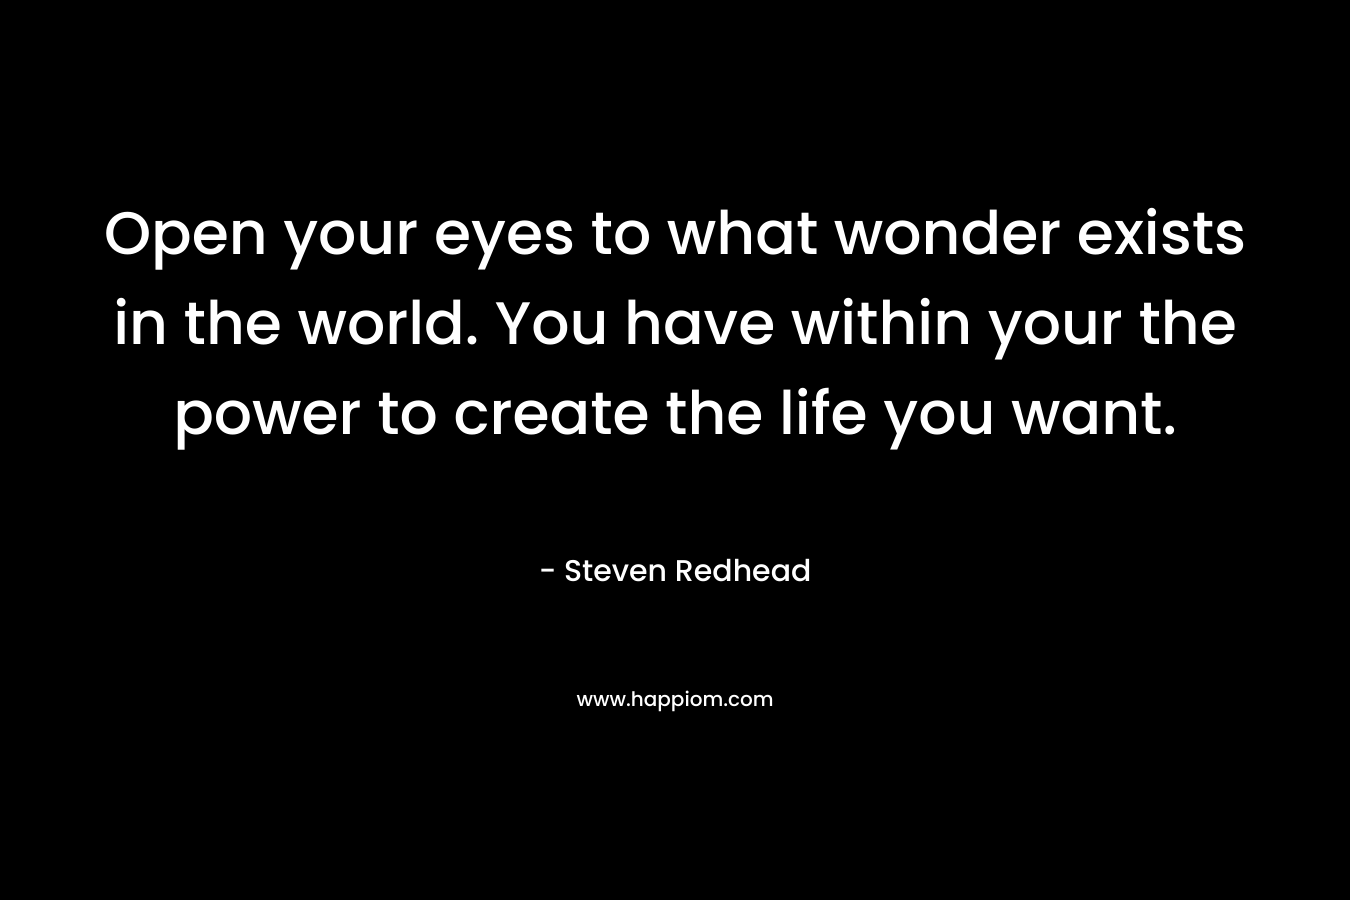 Open your eyes to what wonder exists in the world. You have within your the power to create the life you want.